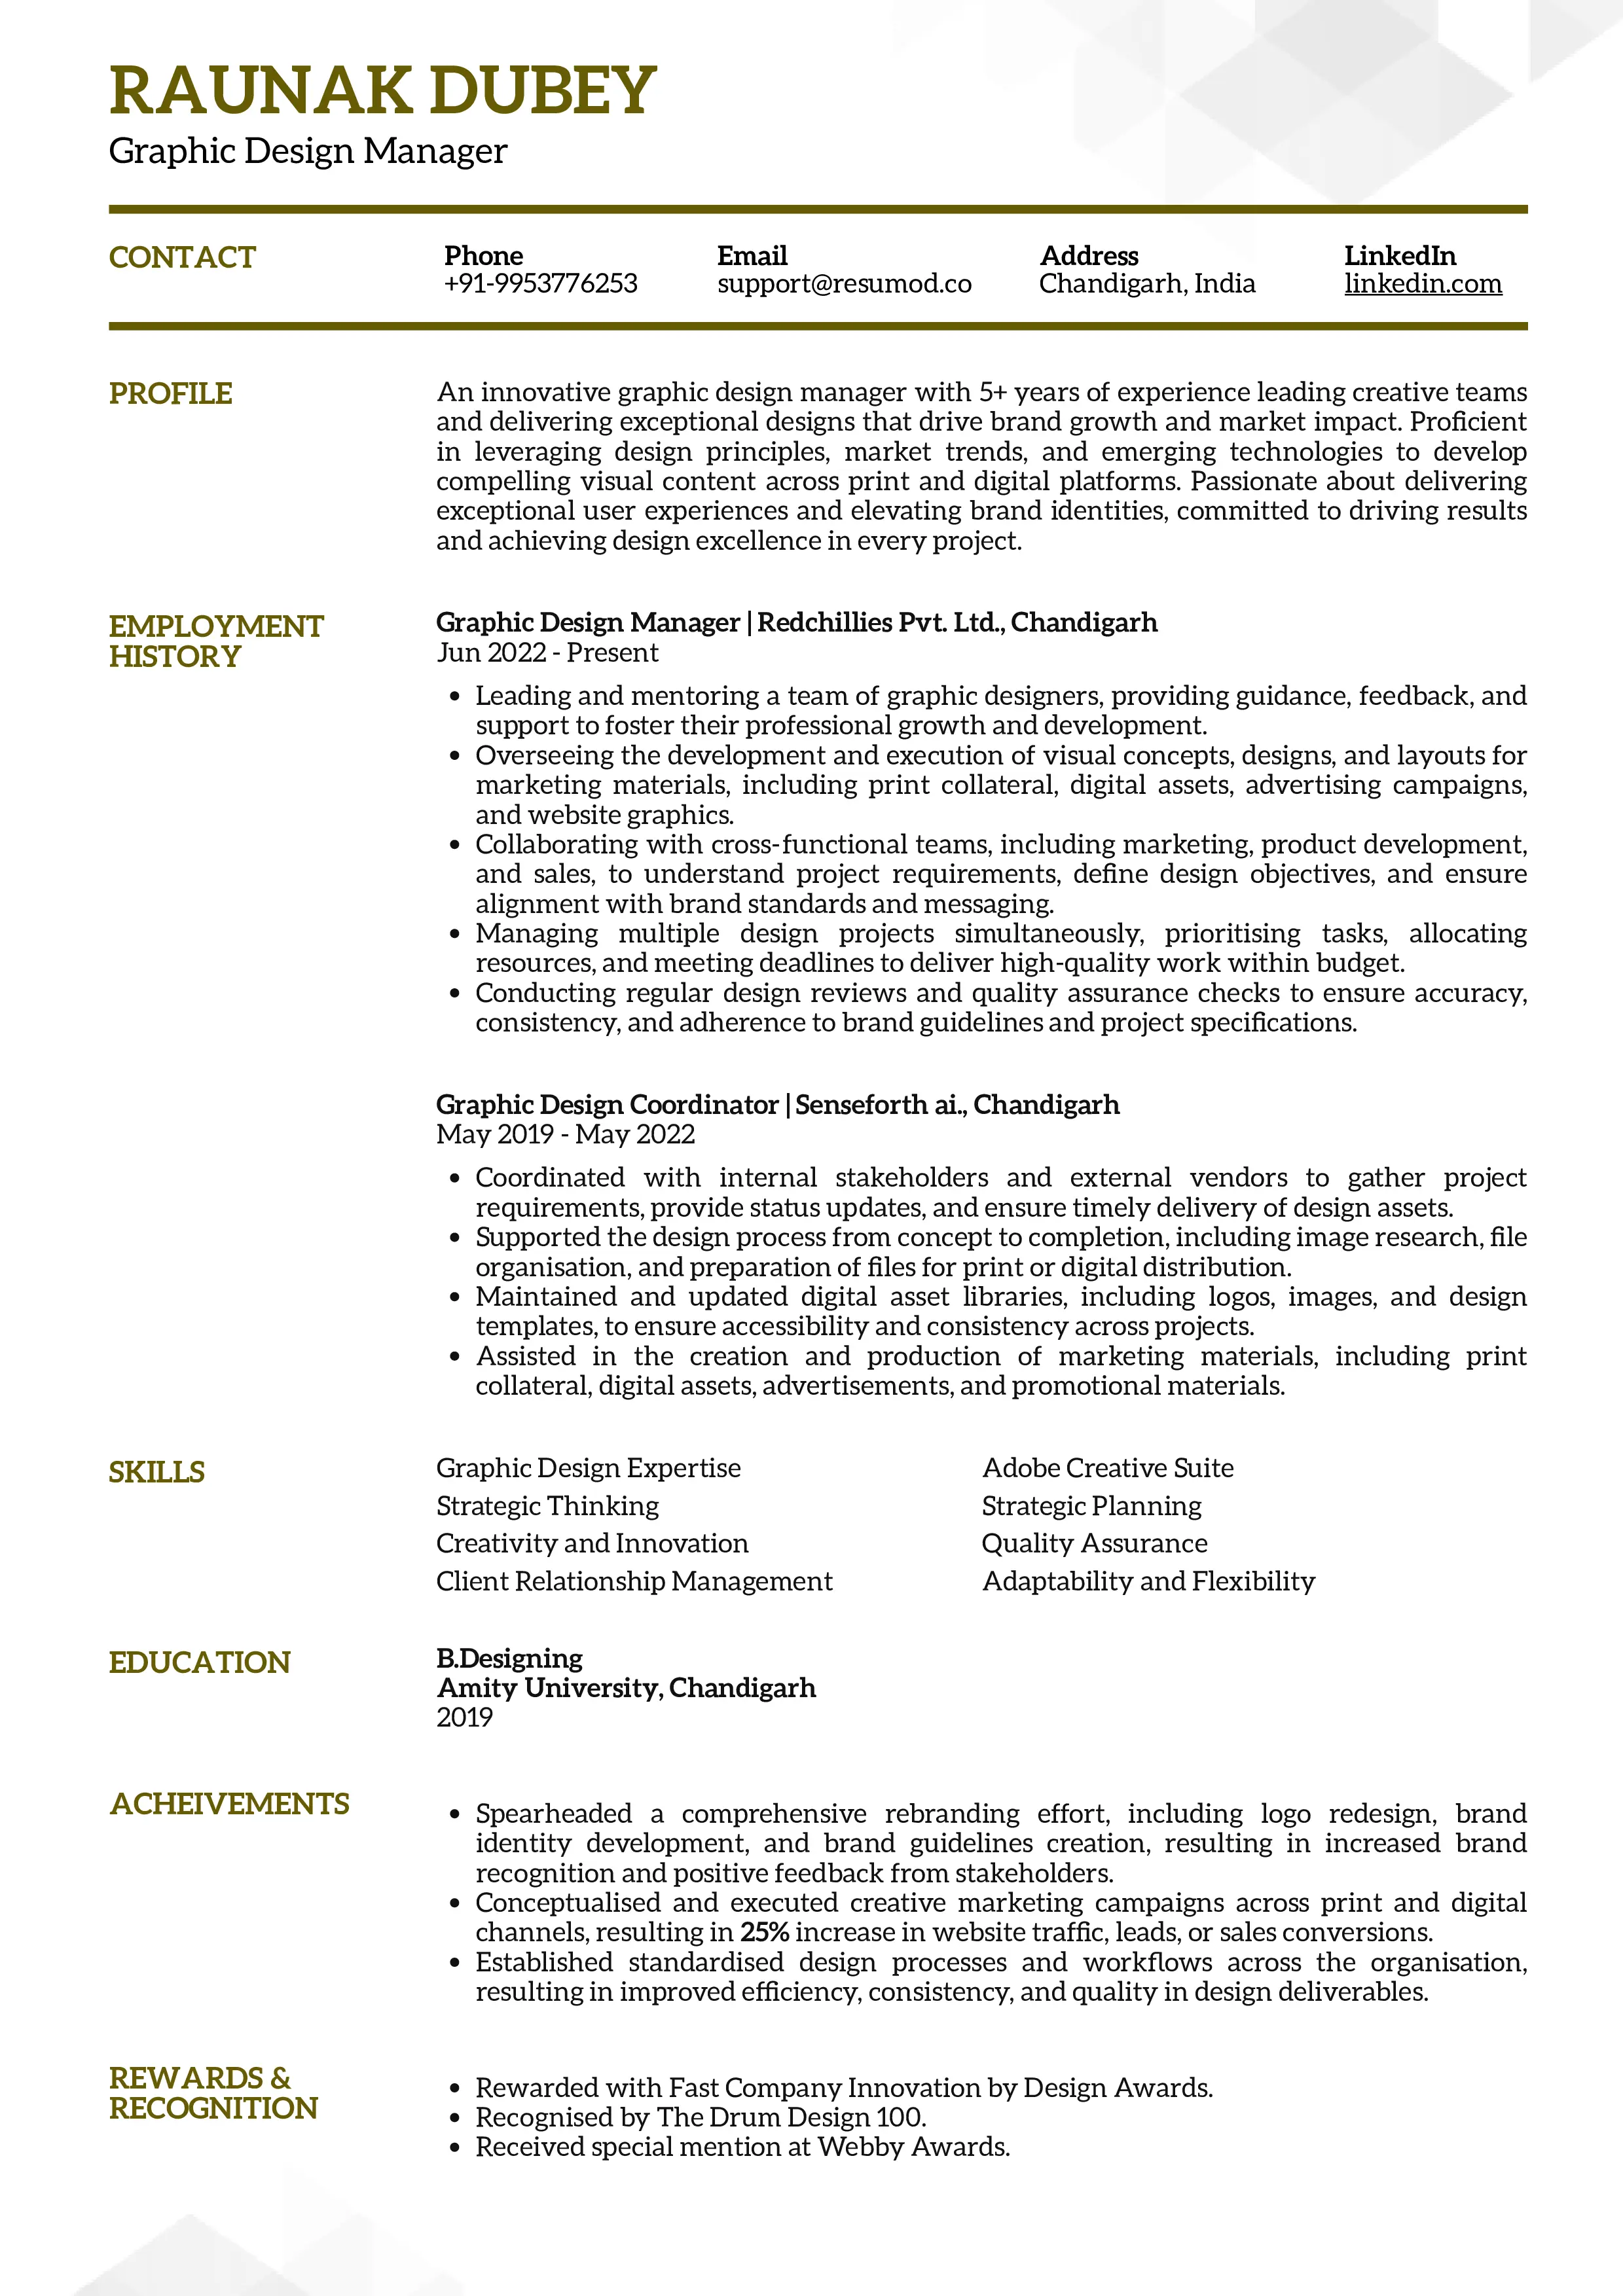 Sample Resume of Graphic Design Manager | Free Resume Templates & Samples on Resumod.co